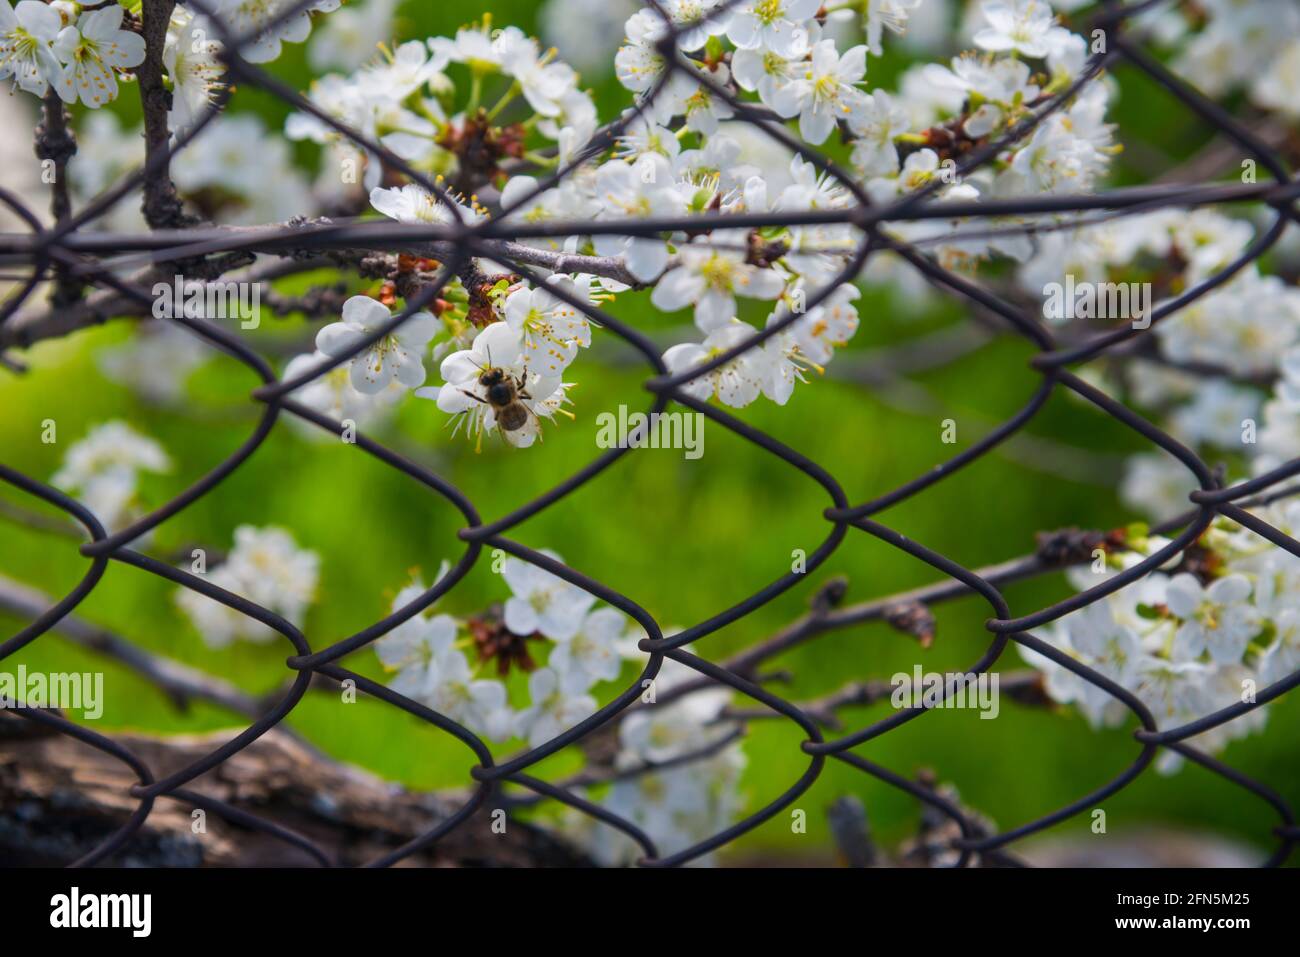 Whte flowers behind a wire netting. Stock Photo